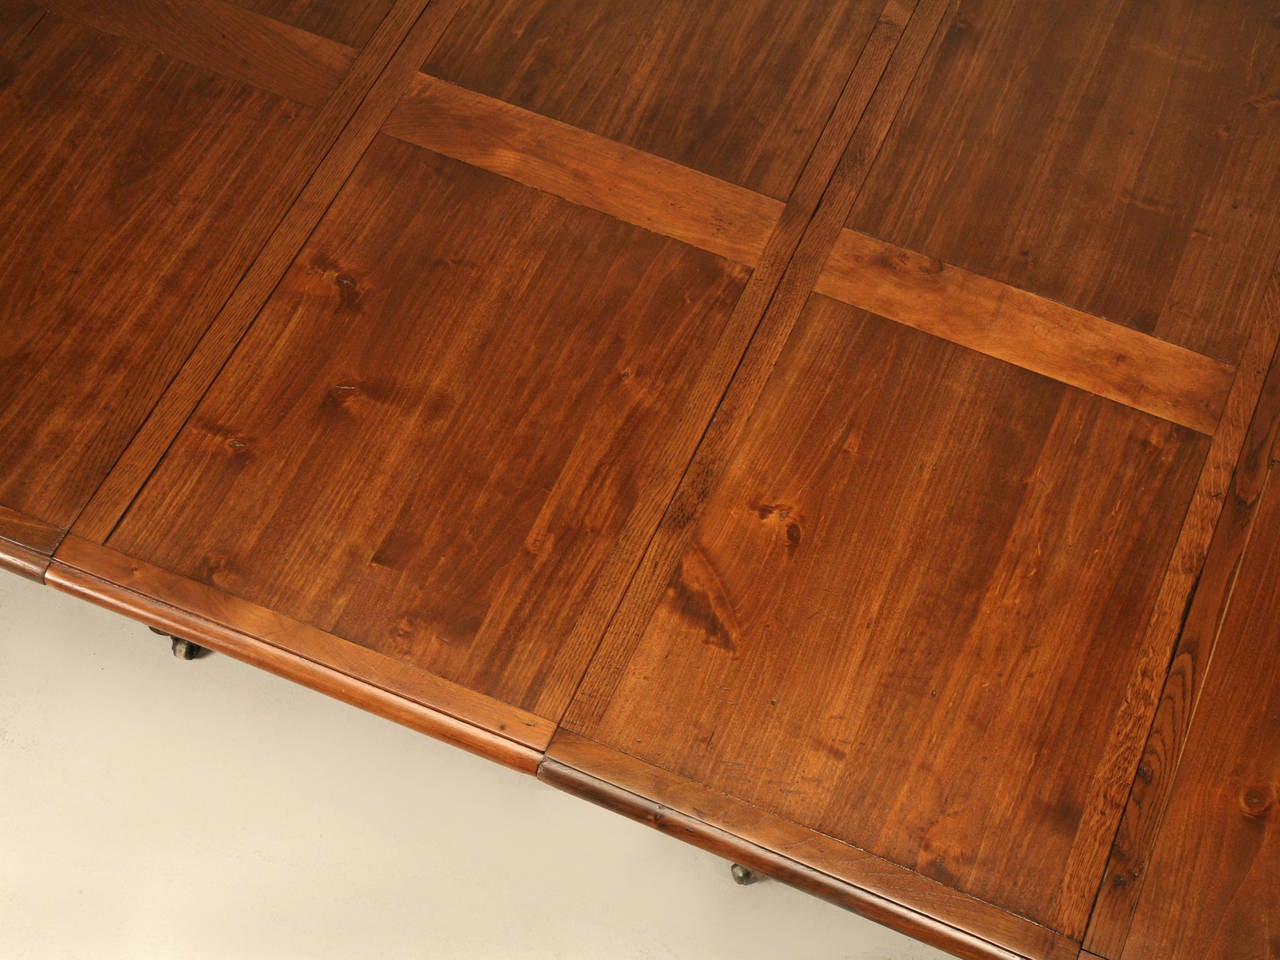 Late 19th Century French Walnut Dining Table with Leaves from Ch. Jeanselme et Cie, circa 1890